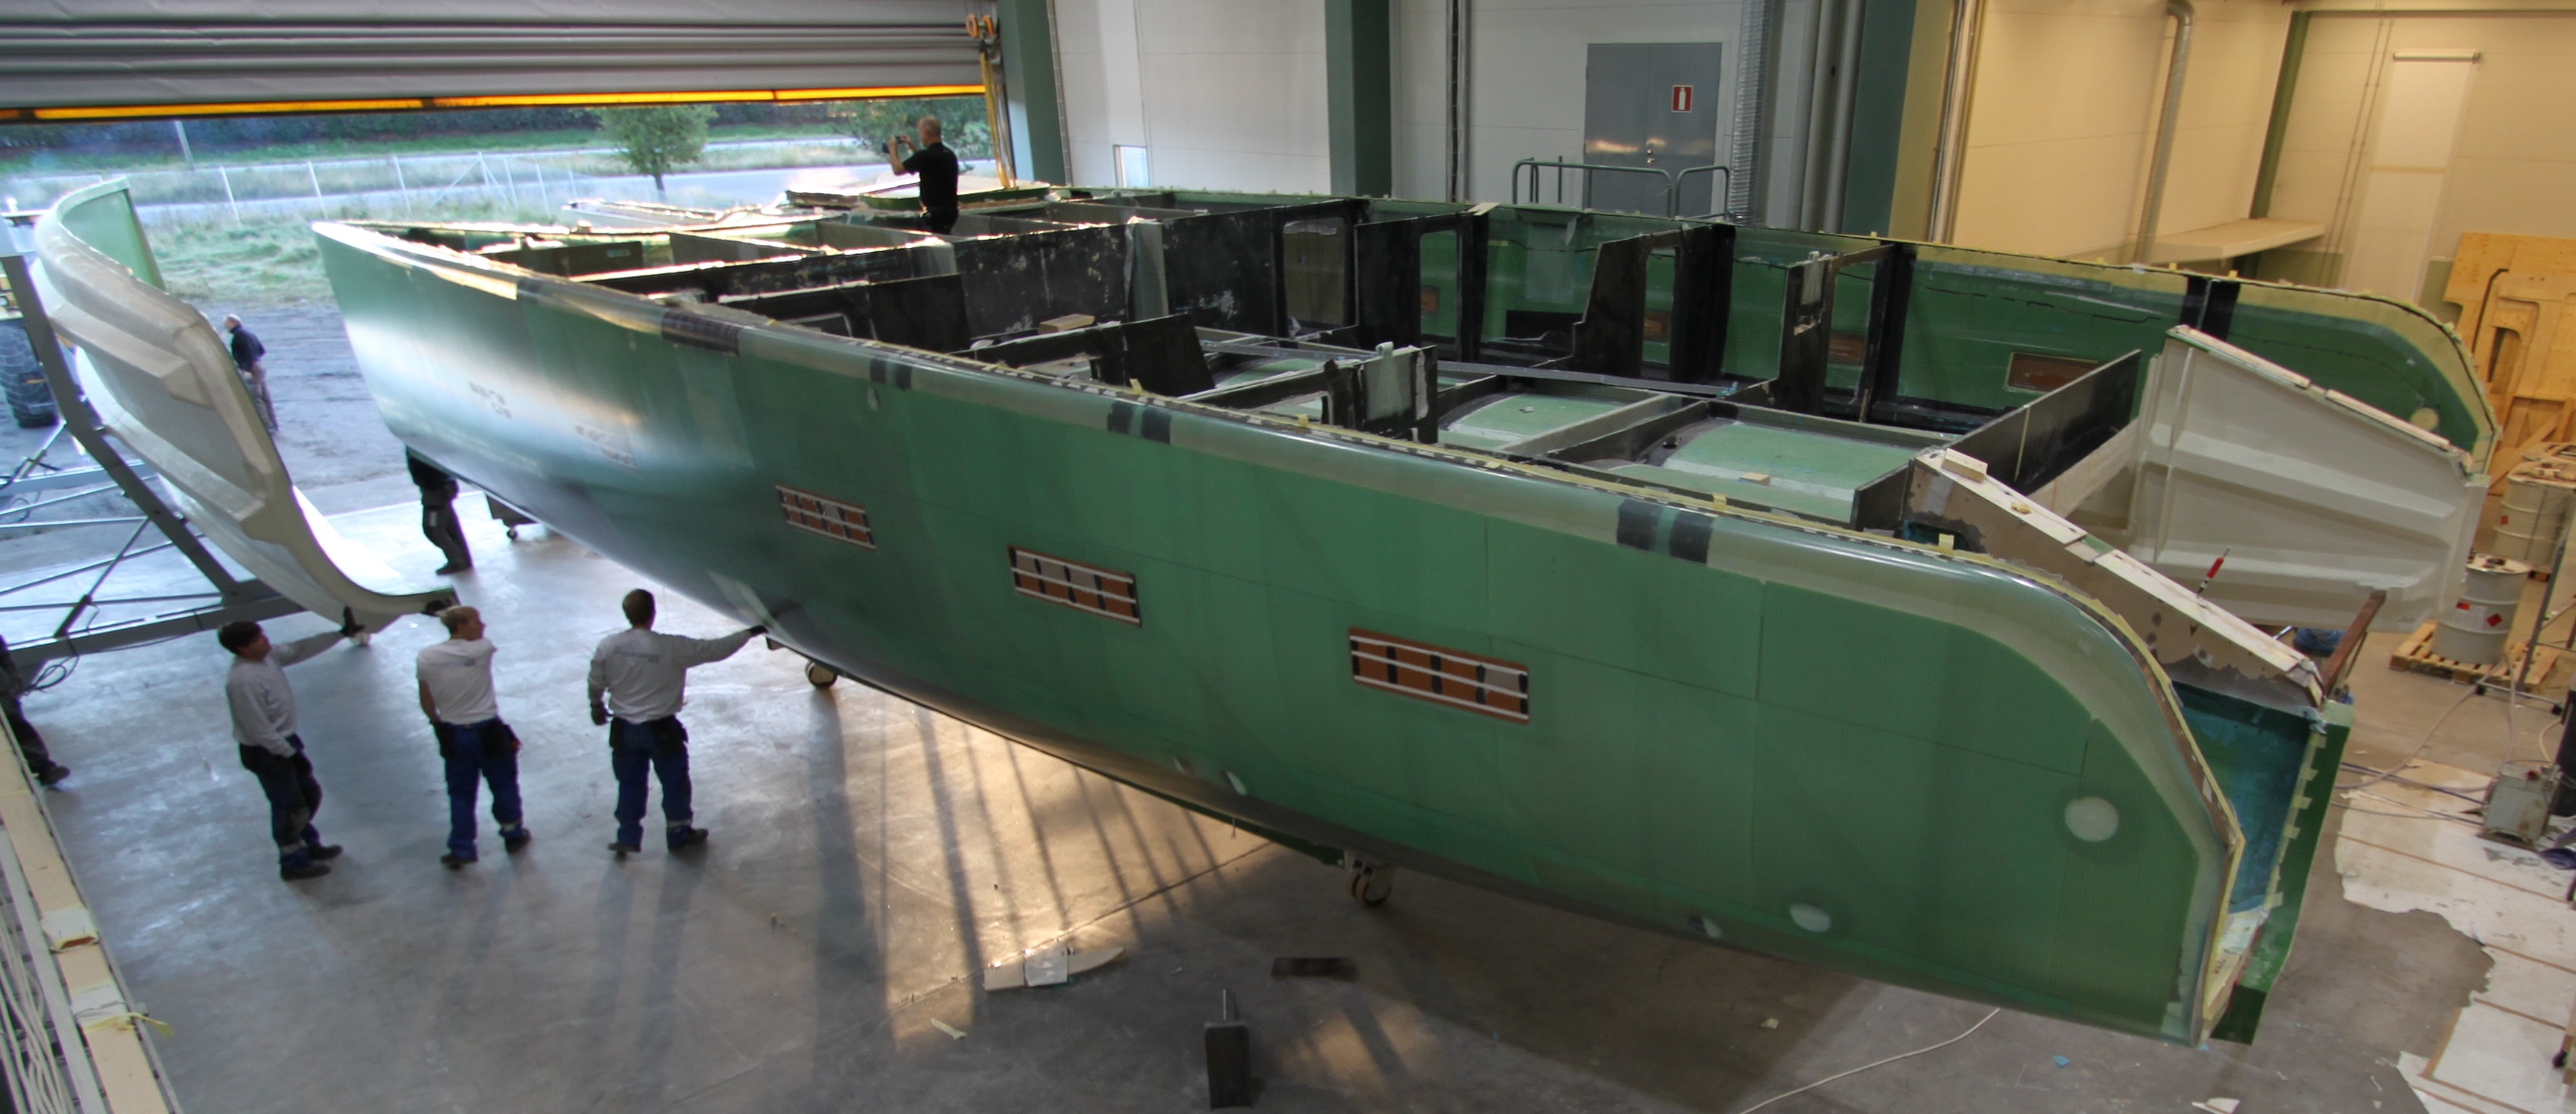 The demoulding of the OE60-001